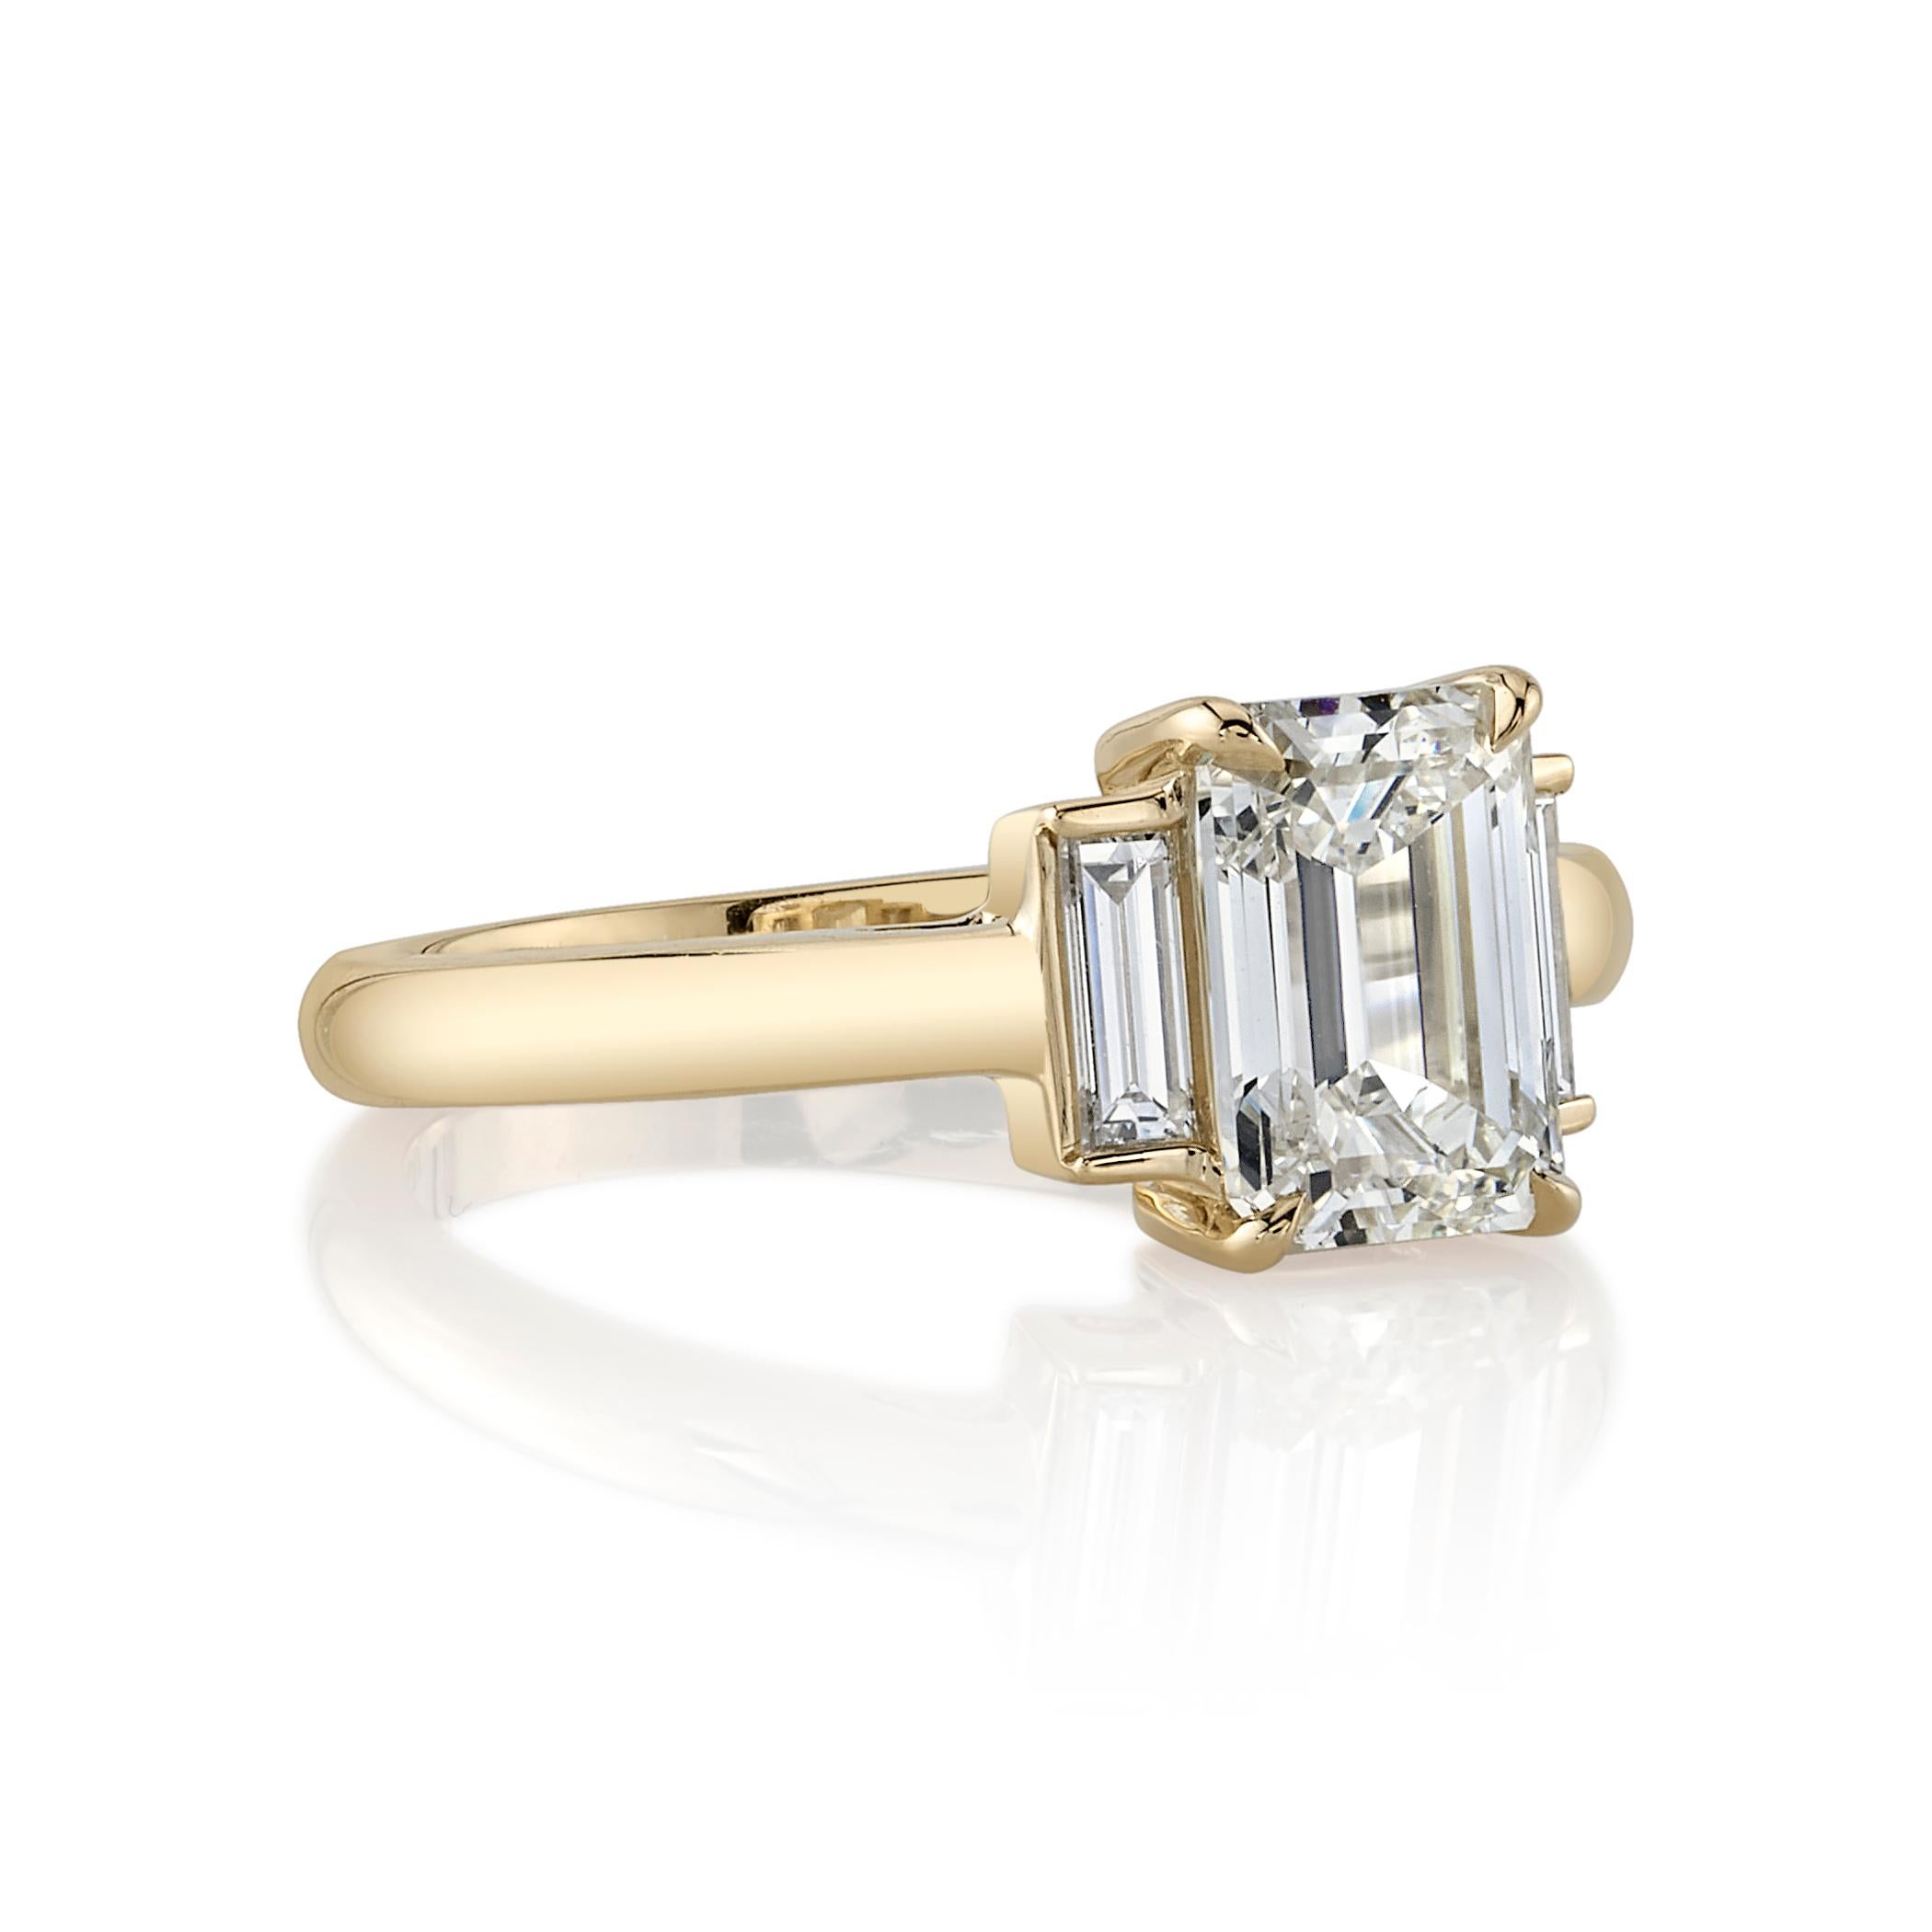 1.72ct M/VVS1 GIA certified emerald cut diamond with 0.25ctw baguette cut accent diamonds set in a handcrafted 18K yellow gold mounting.
